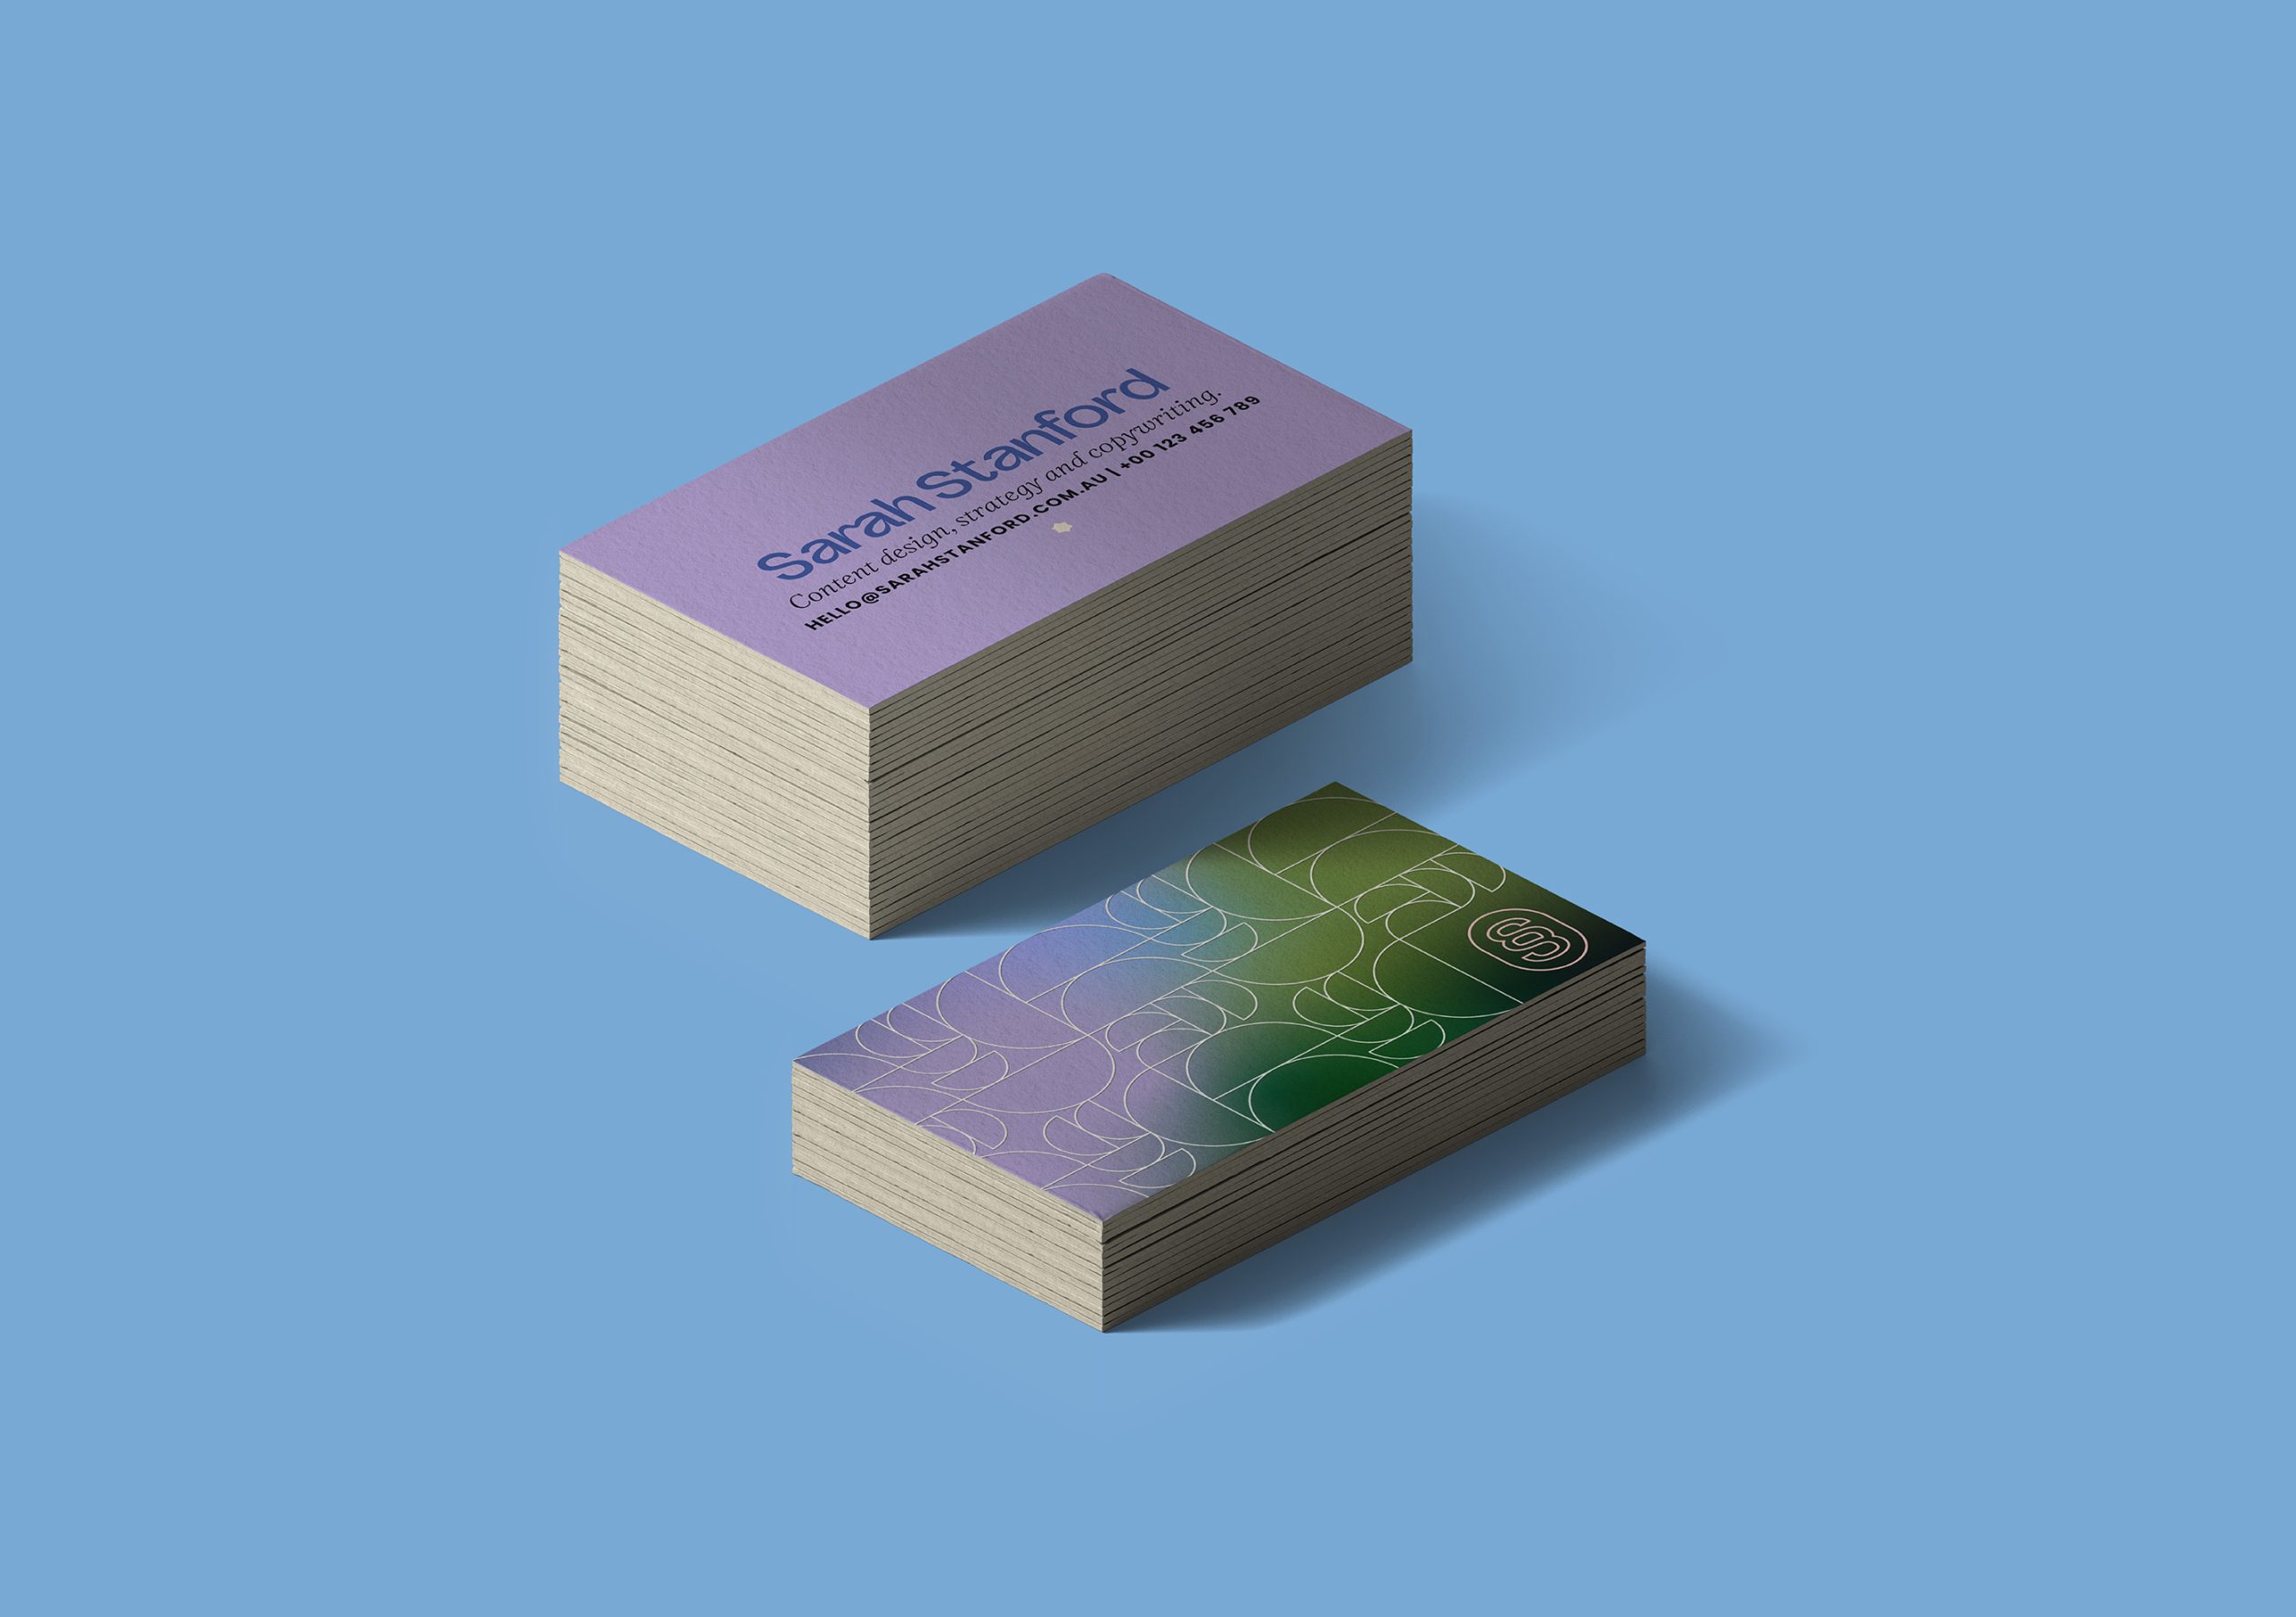 Brand identity case study showing the Sarah Stanford business cards on a light blue background. The front of the card features a purple and green gradient with the brand pattern overlaying with the back card featuring founder Sarah’s details.